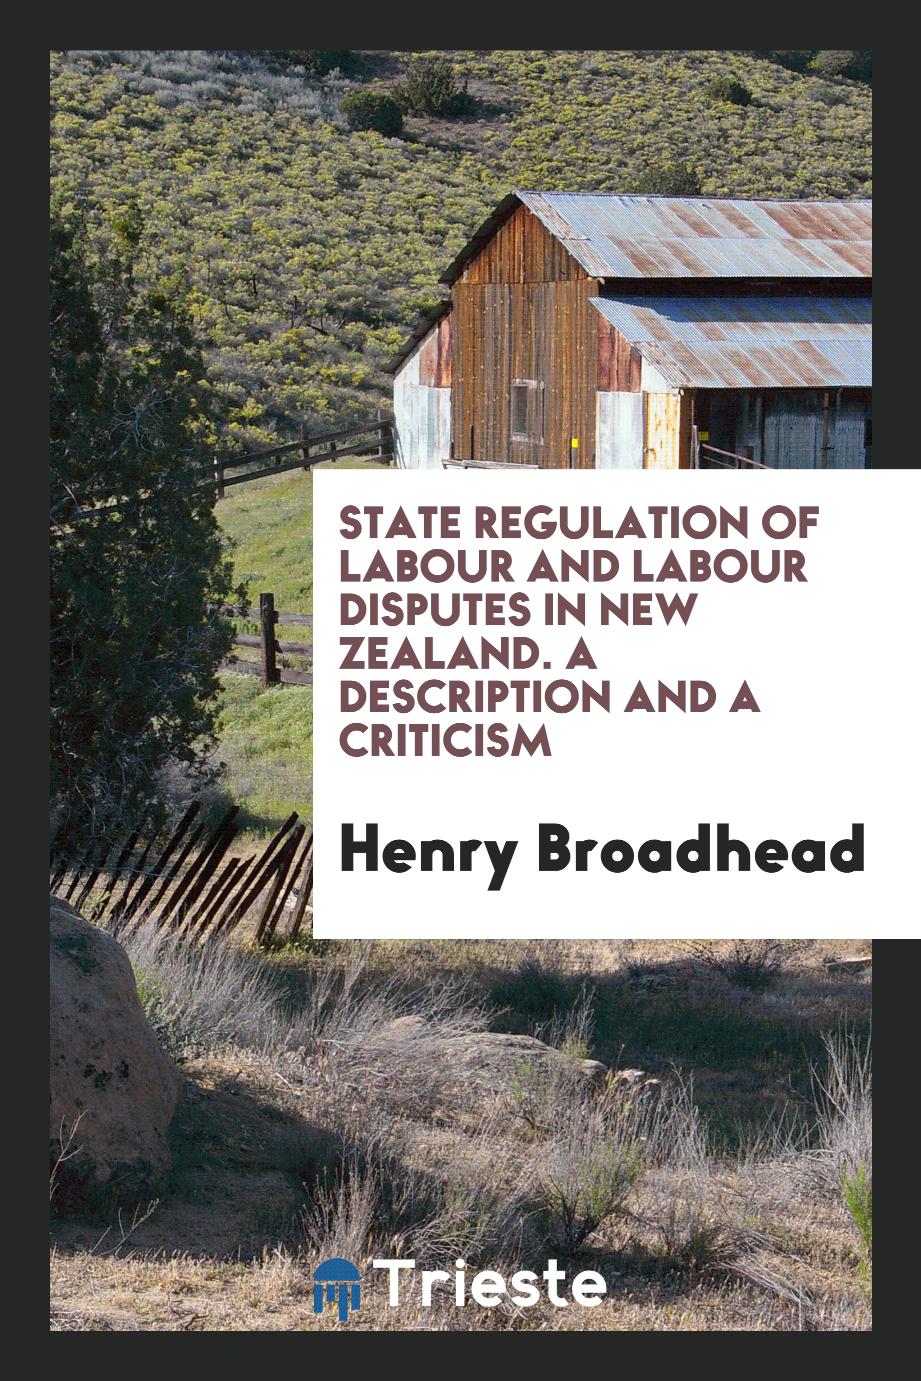 State regulation of labour and labour disputes in New Zealand. A description and a criticism